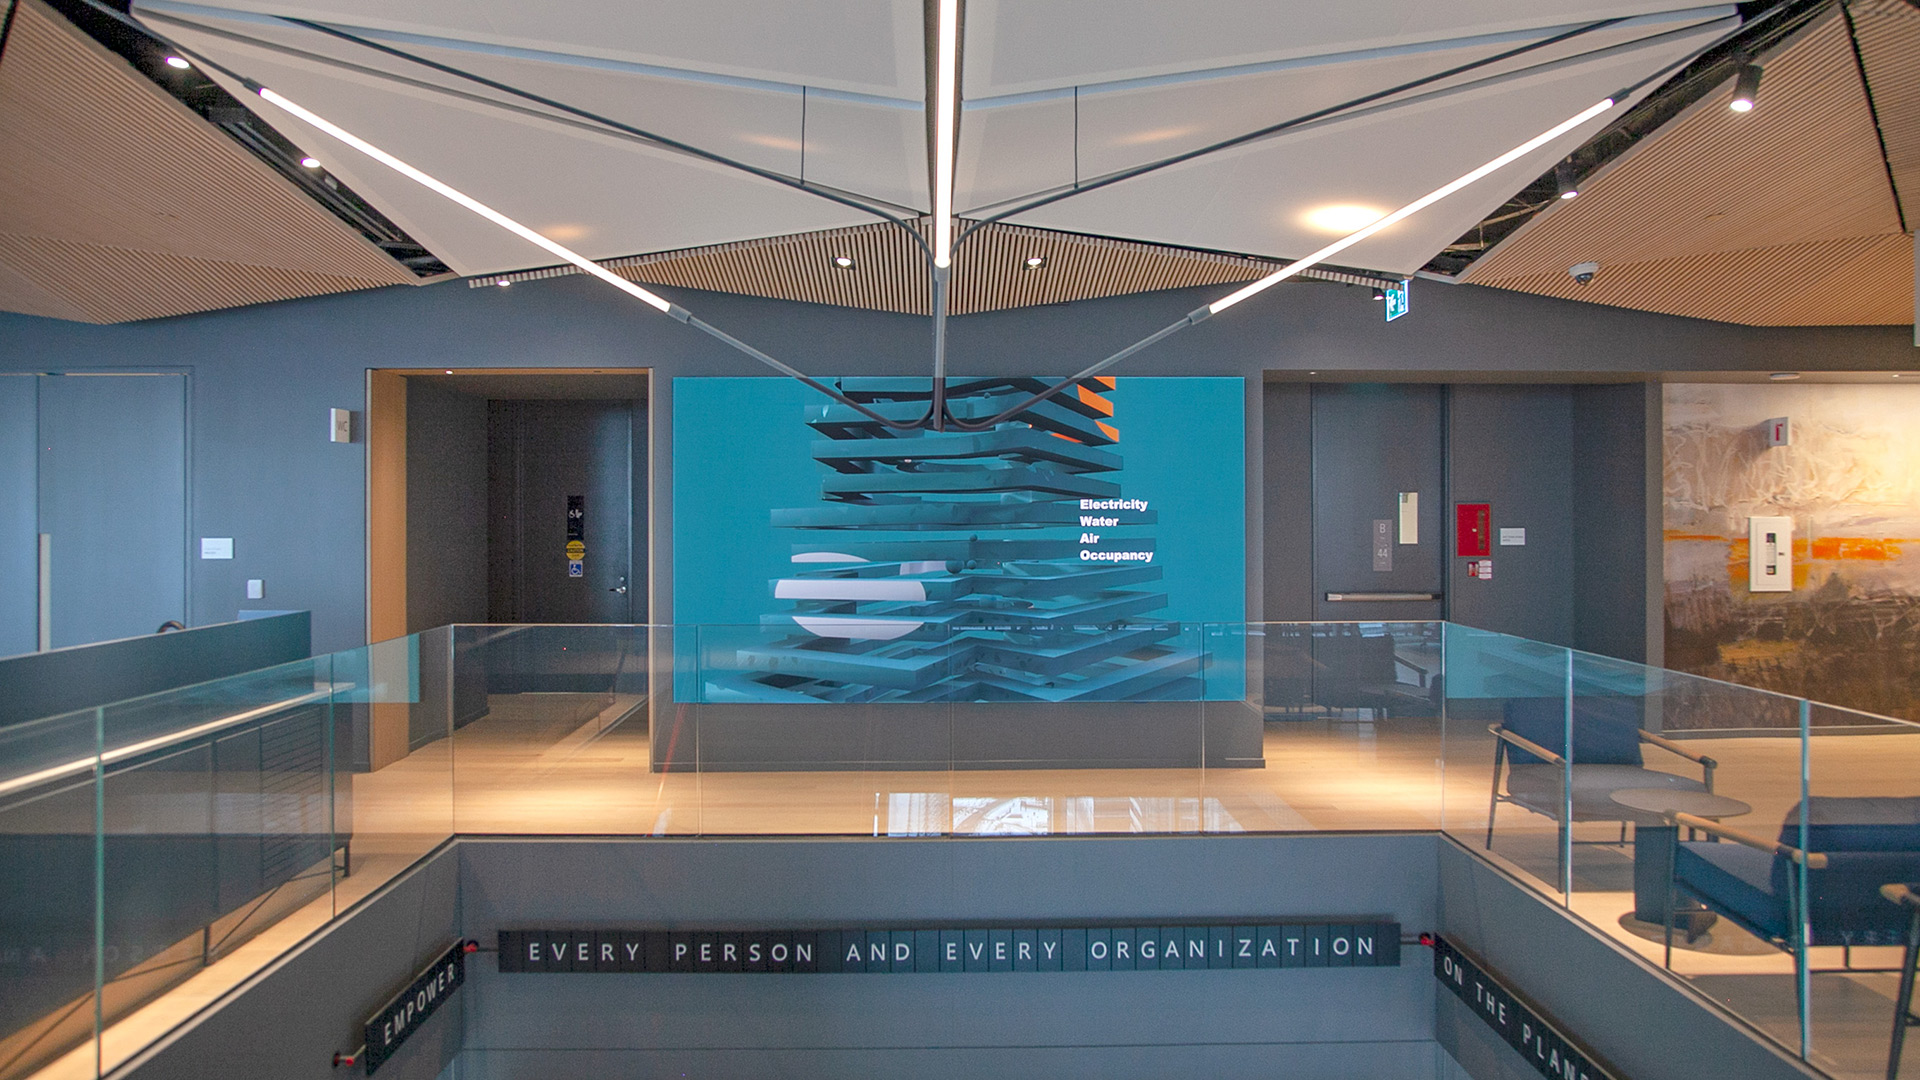 A large lobby display showing a the digital art sculpture called Day. The sculpture is formed based of live data measured within the building: Electricity, Water, Air and Occupancy